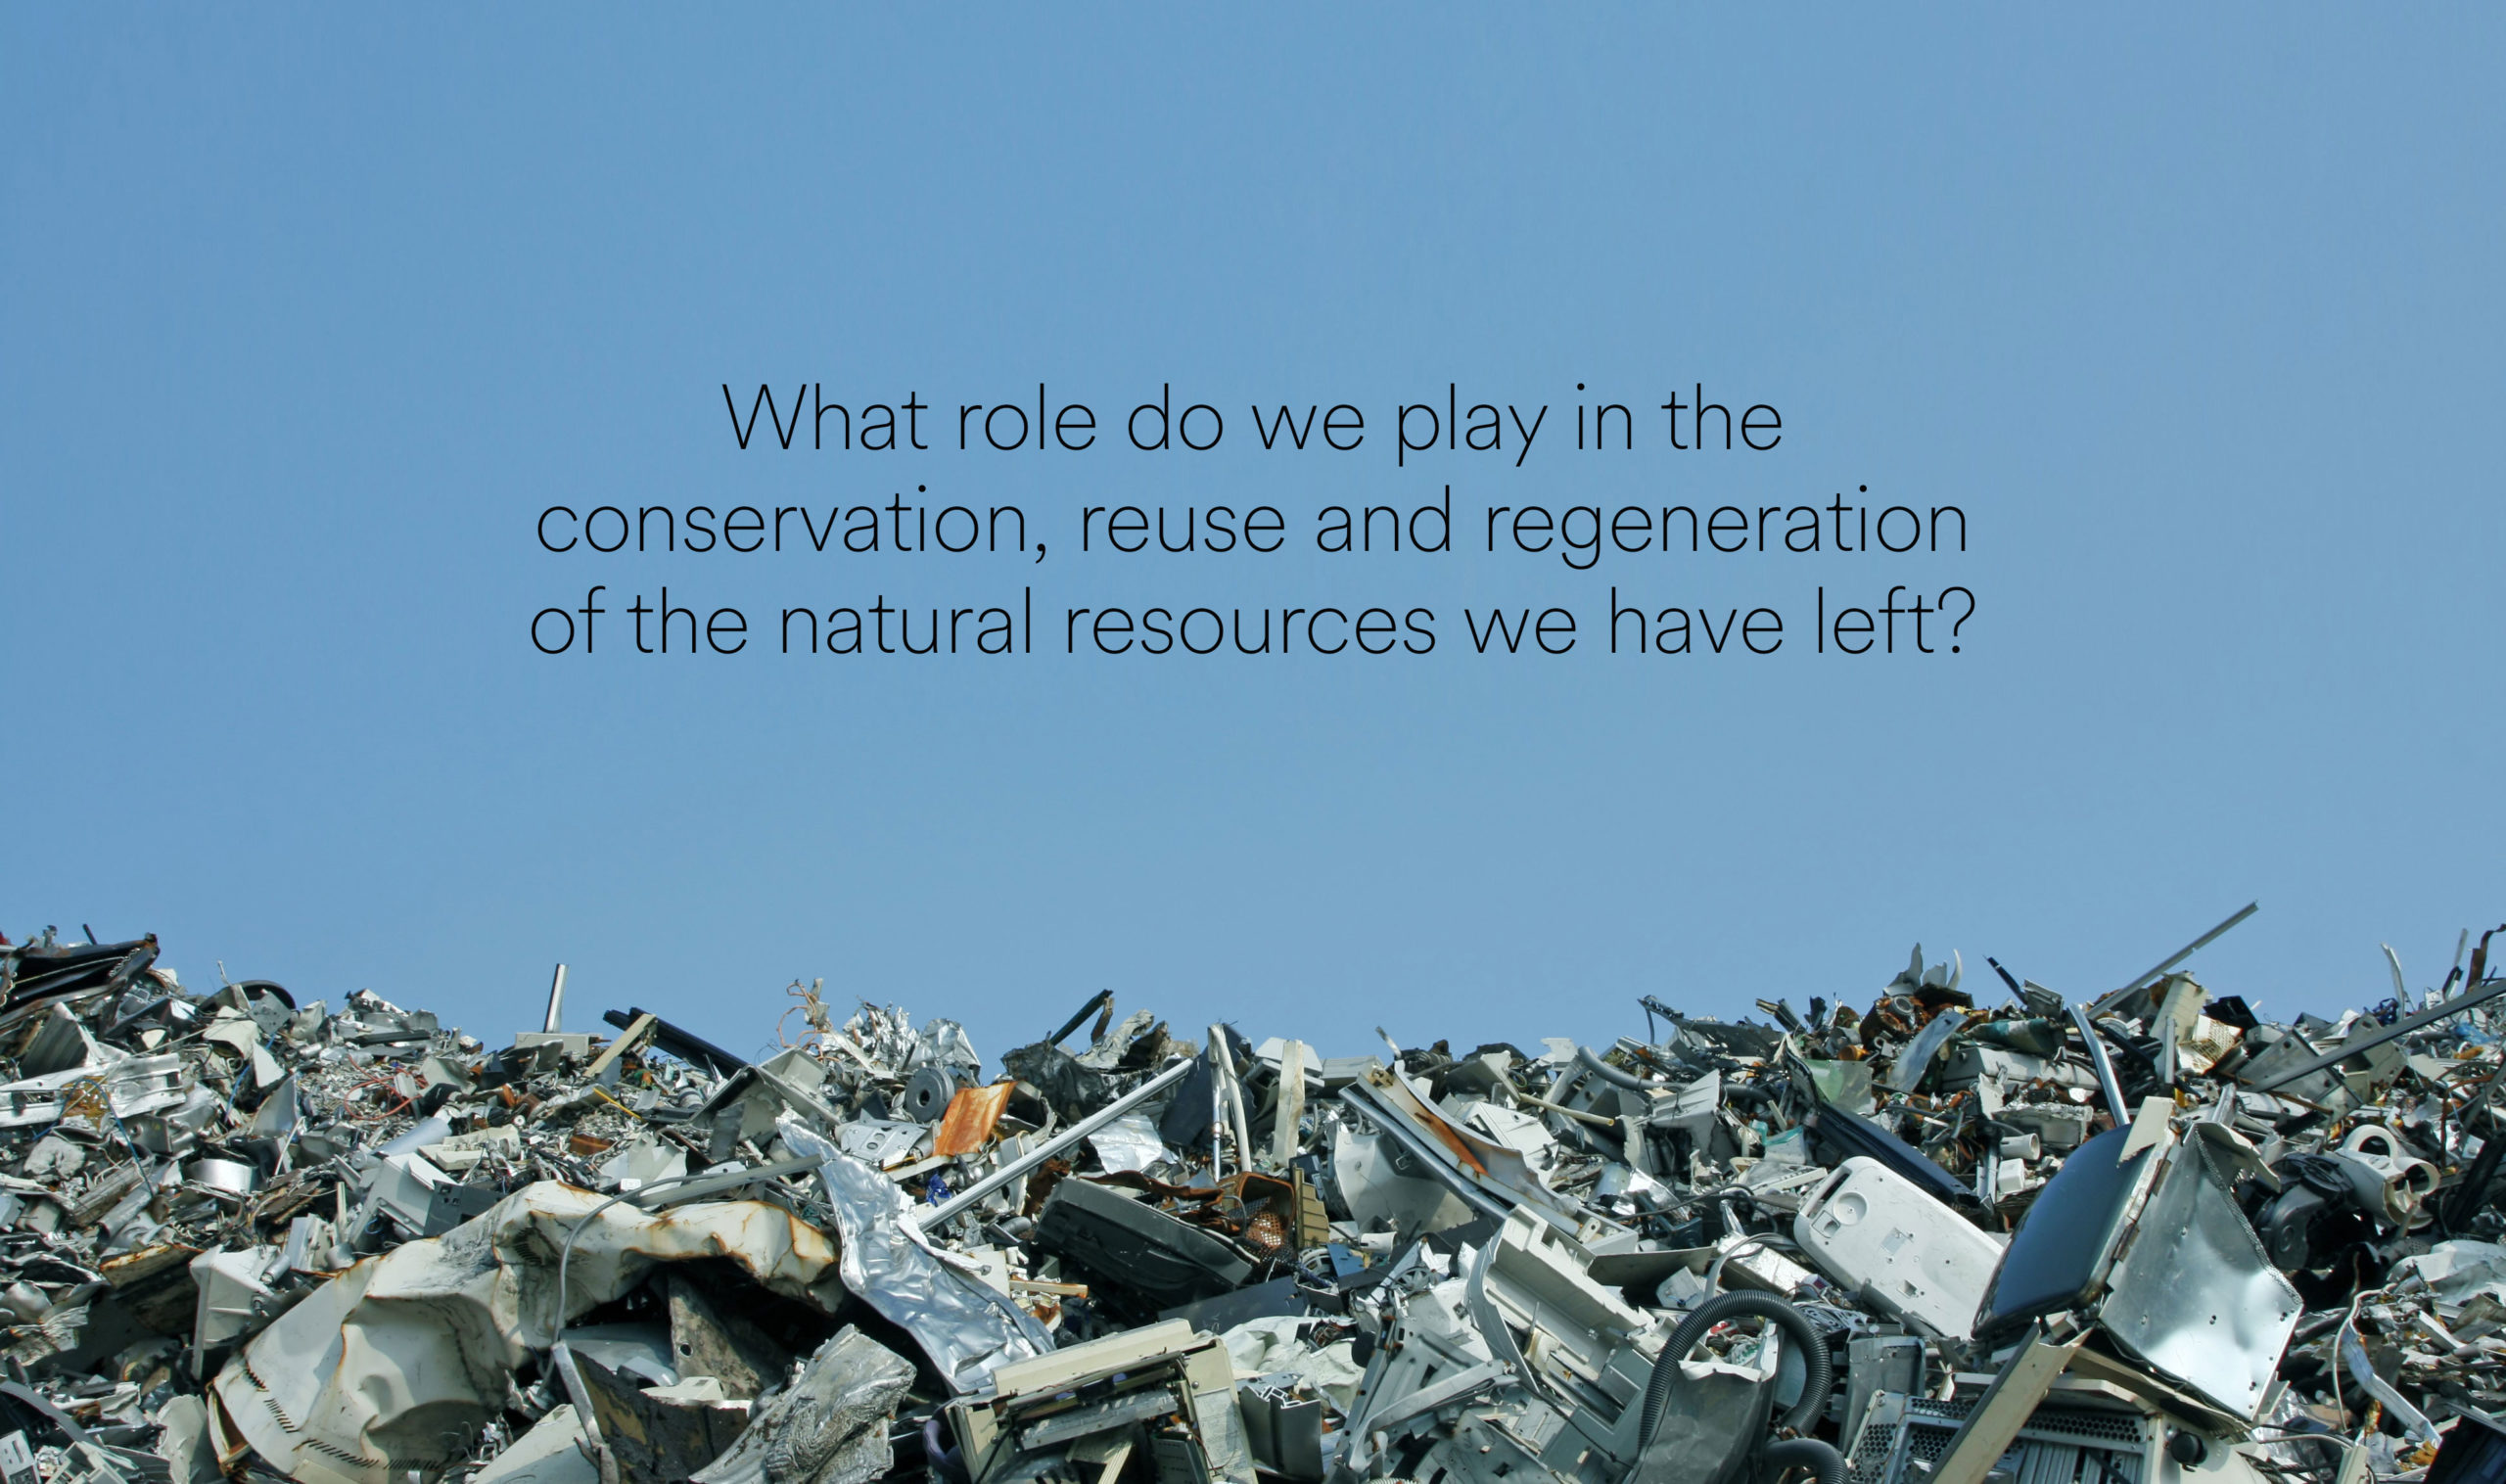 The role we play in reuse and regeneration